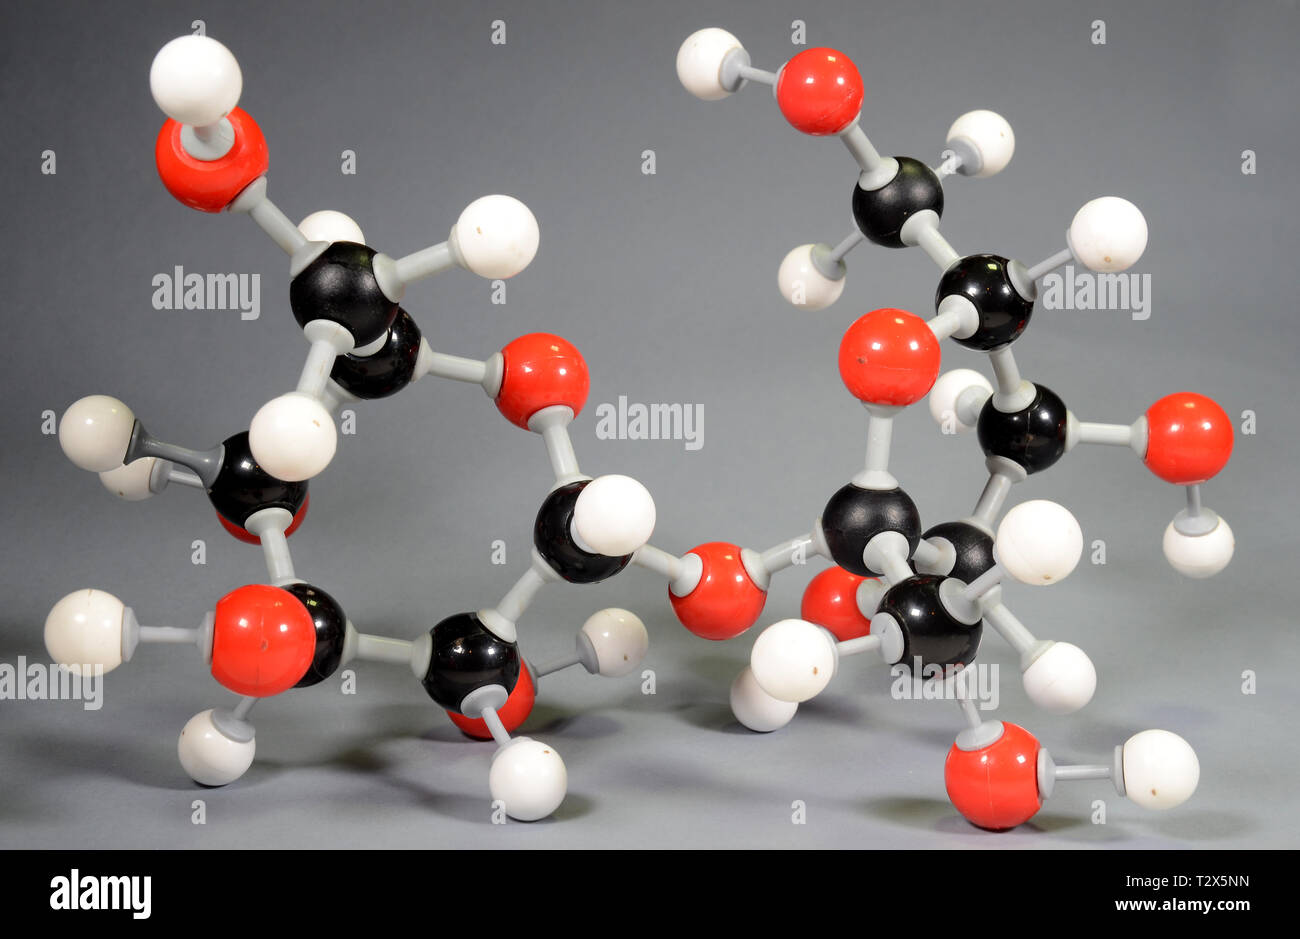 Molecule model of sugar (C12H22O11). Red is oxygen, black is carbon, and white is hydrogen. Stock Photo